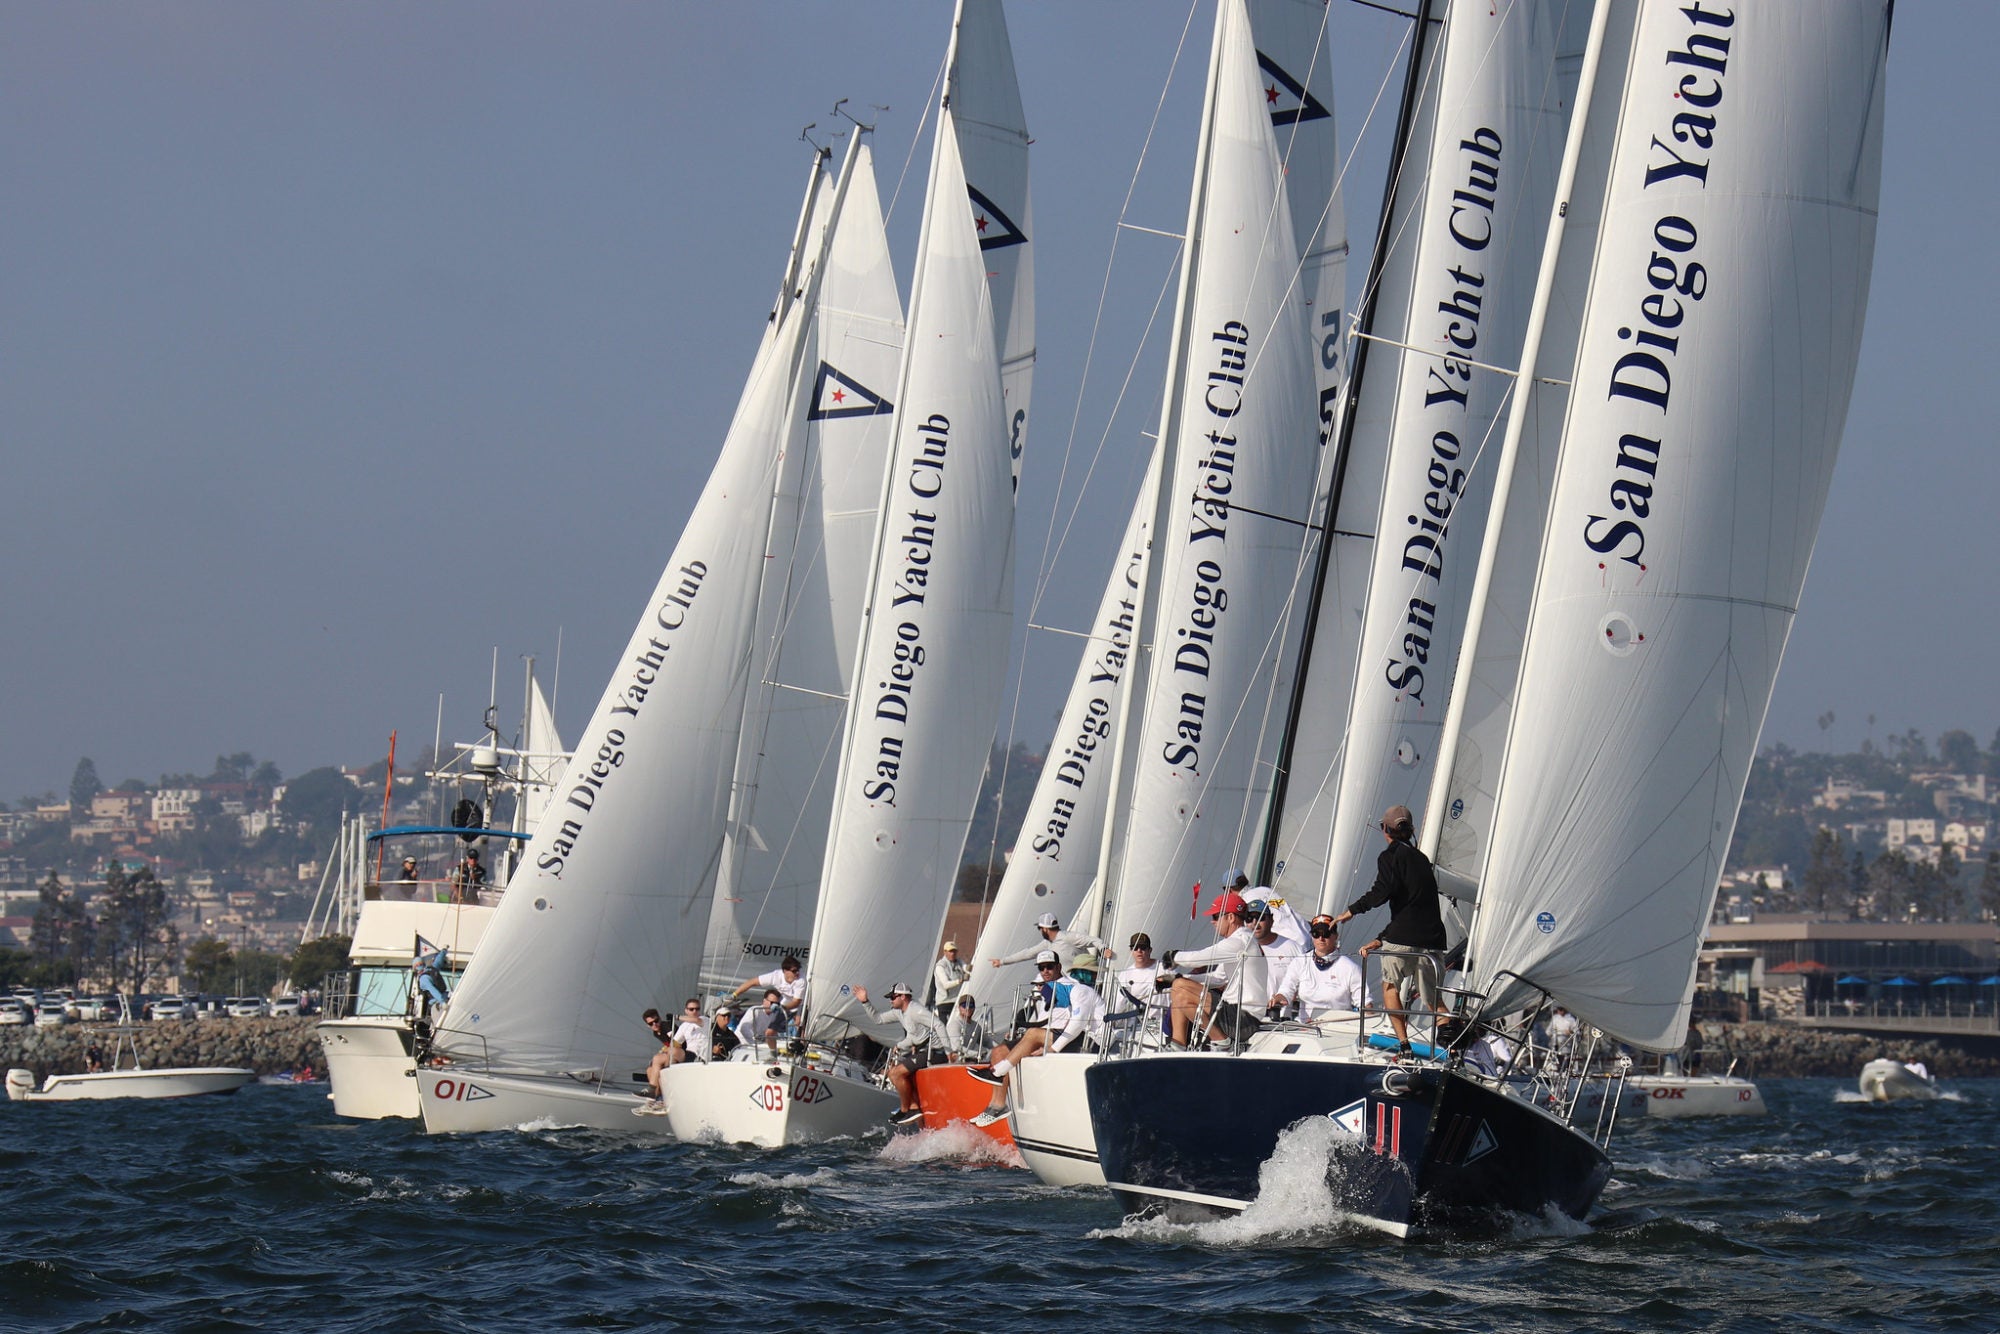 North Sails Supports One Design Racing at the San Diego Yacht Club